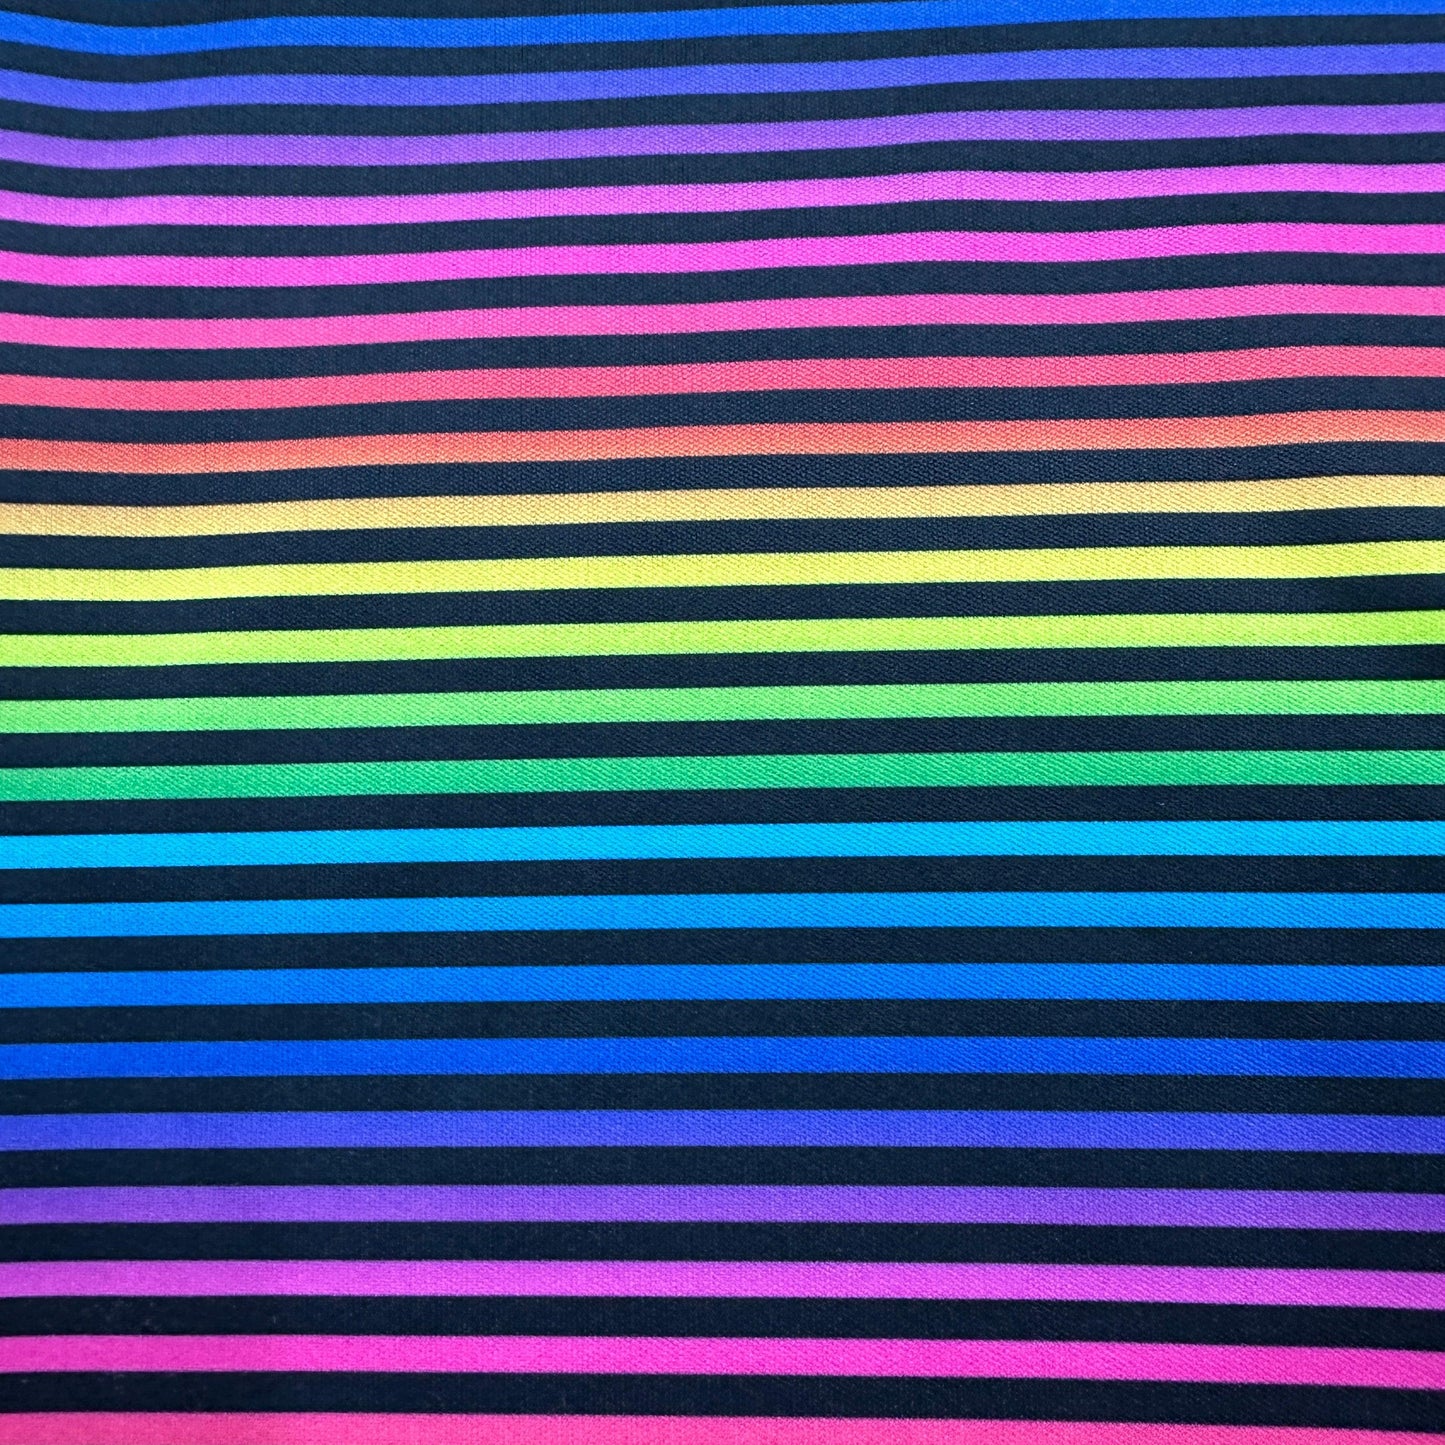 Rainbow and Black Stripes on 1 mil PUL Fabric - Made in the USA - Nature's Fabrics